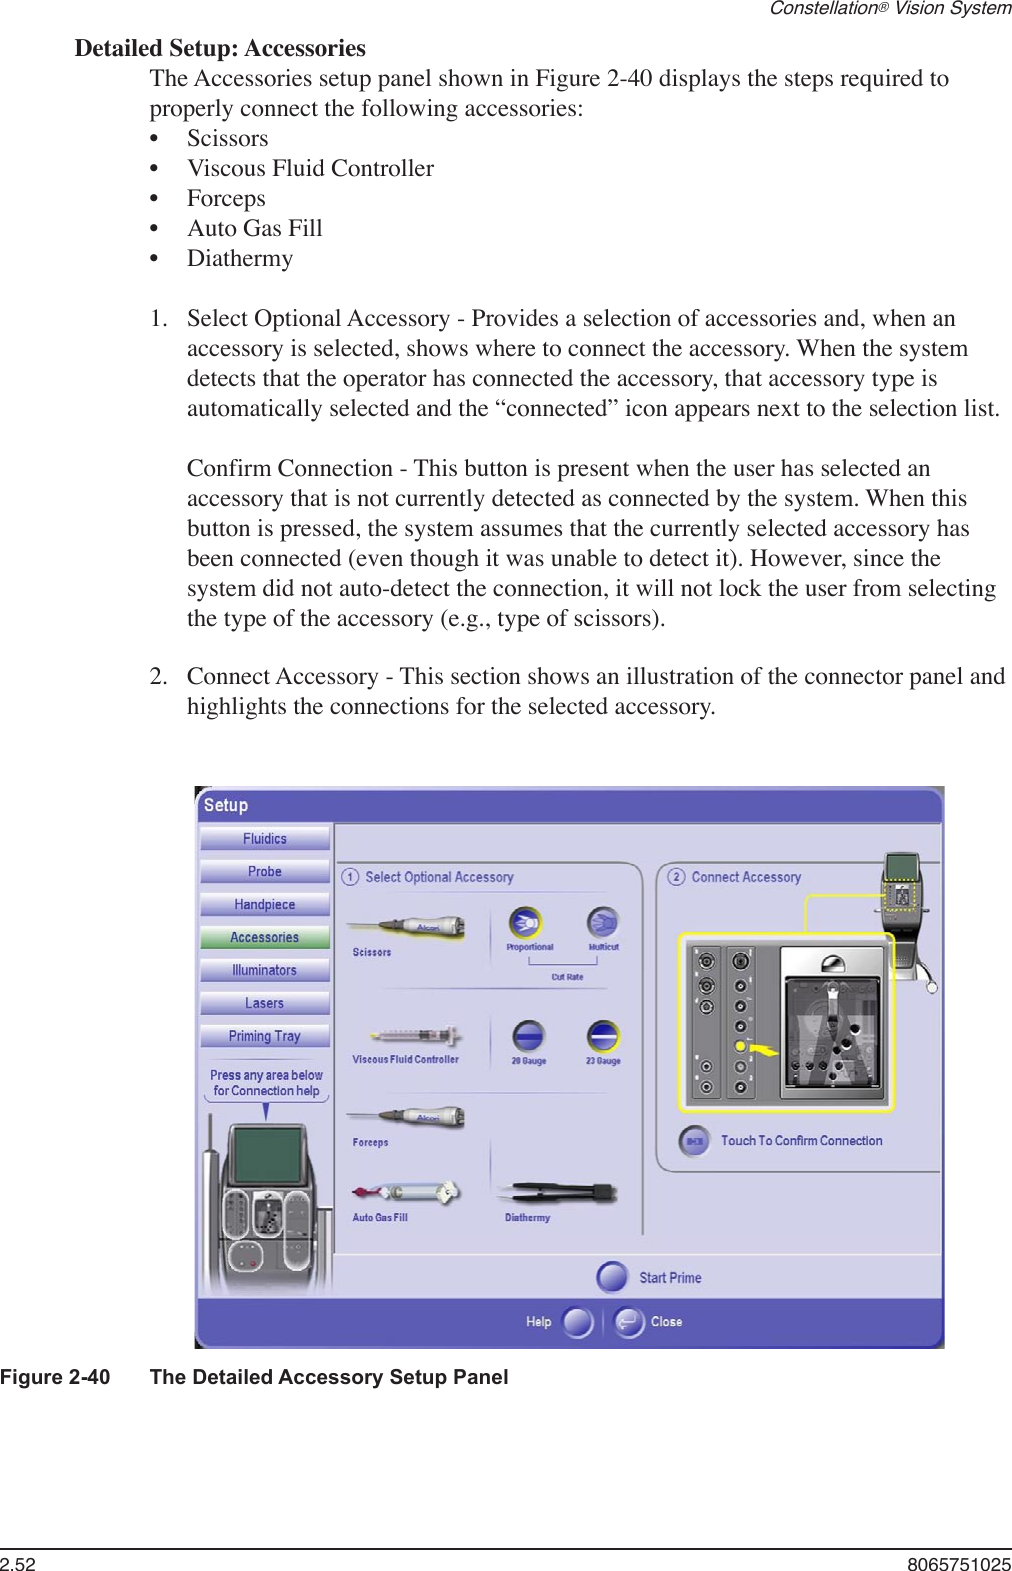 2.52  8065751025Constellation® Vision SystemDetailed Setup: AccessoriesThe Accessories setup panel shown in Figure 2-40 displays the steps required to properly connect the following accessories:ScissorsViscous Fluid ControllerForcepsAuto Gas FillDiathermy Select Optional Accessory - Provides a selection of accessories and, when an accessory is selected, shows where to connect the accessory. When the system detects that the operator has connected the accessory, that accessory type is automatically selected and the “connected” icon appears next to the selection list.  Confirm Connection - This button is present when the user has selected an accessory that is not currently detected as connected by the system. When this button is pressed, the system assumes that the currently selected accessory has been connected (even though it was unable to detect it). However, since the system did not auto-detect the connection, it will not lock the user from selecting the type of the accessory (e.g., type of scissors).Connect Accessory - This section shows an illustration of the connector panel and highlights the connections for the selected accessory.•••••1.2.Figure 2-40  The Detailed Accessory Setup Panel